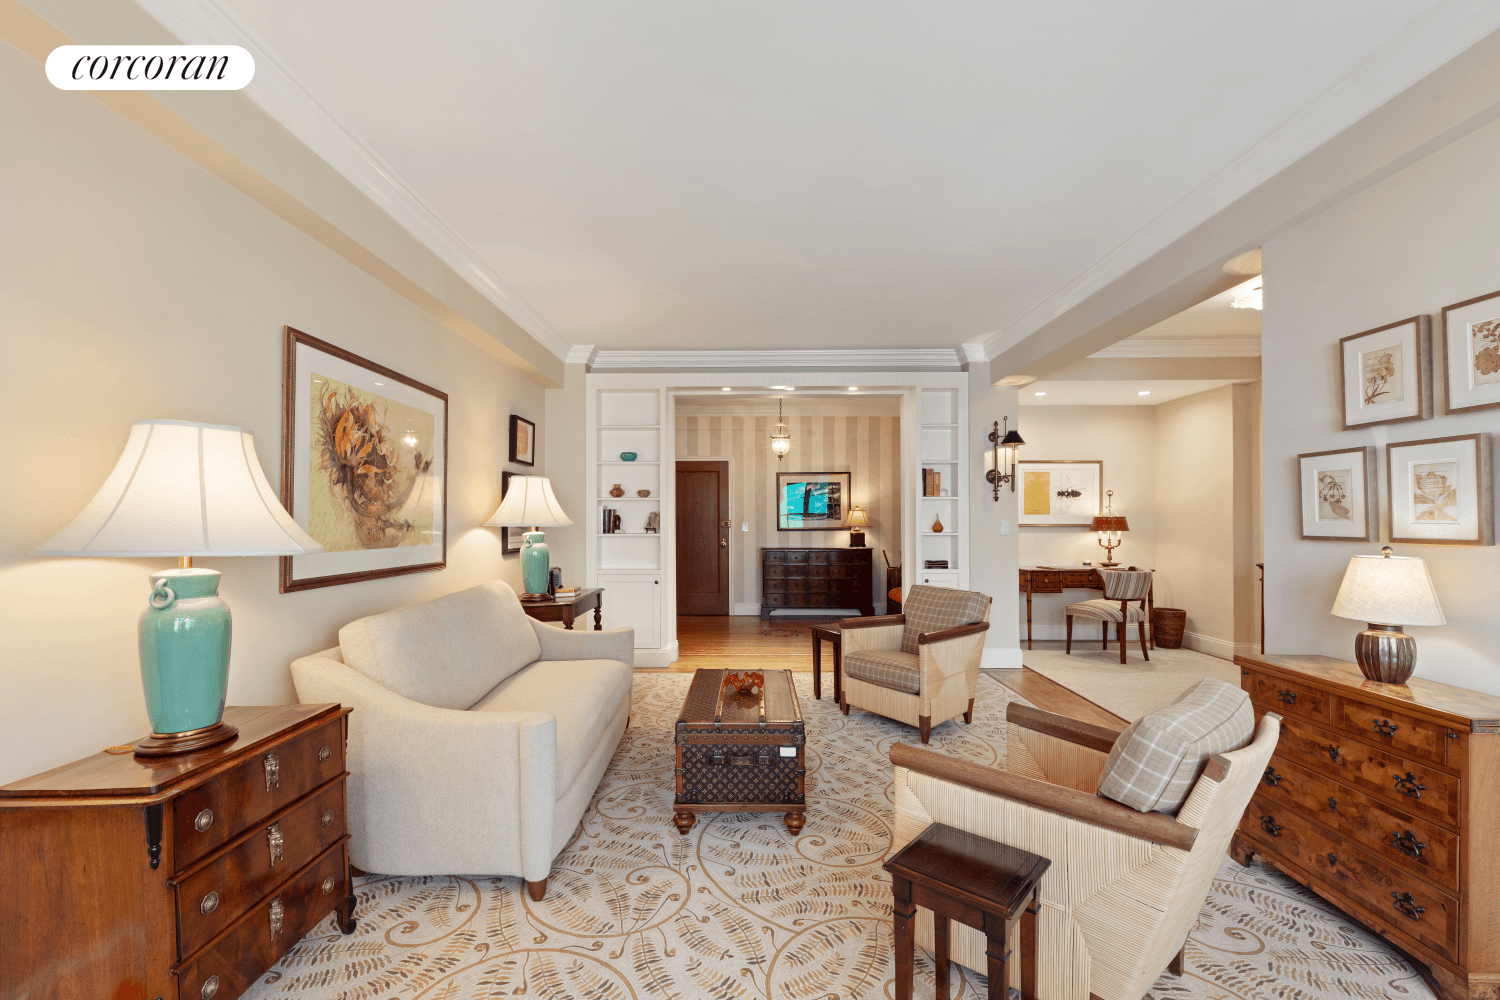 Superbly situated between Central Park and Madison Avenue, this bright one bedroom apartment is perfection itself.